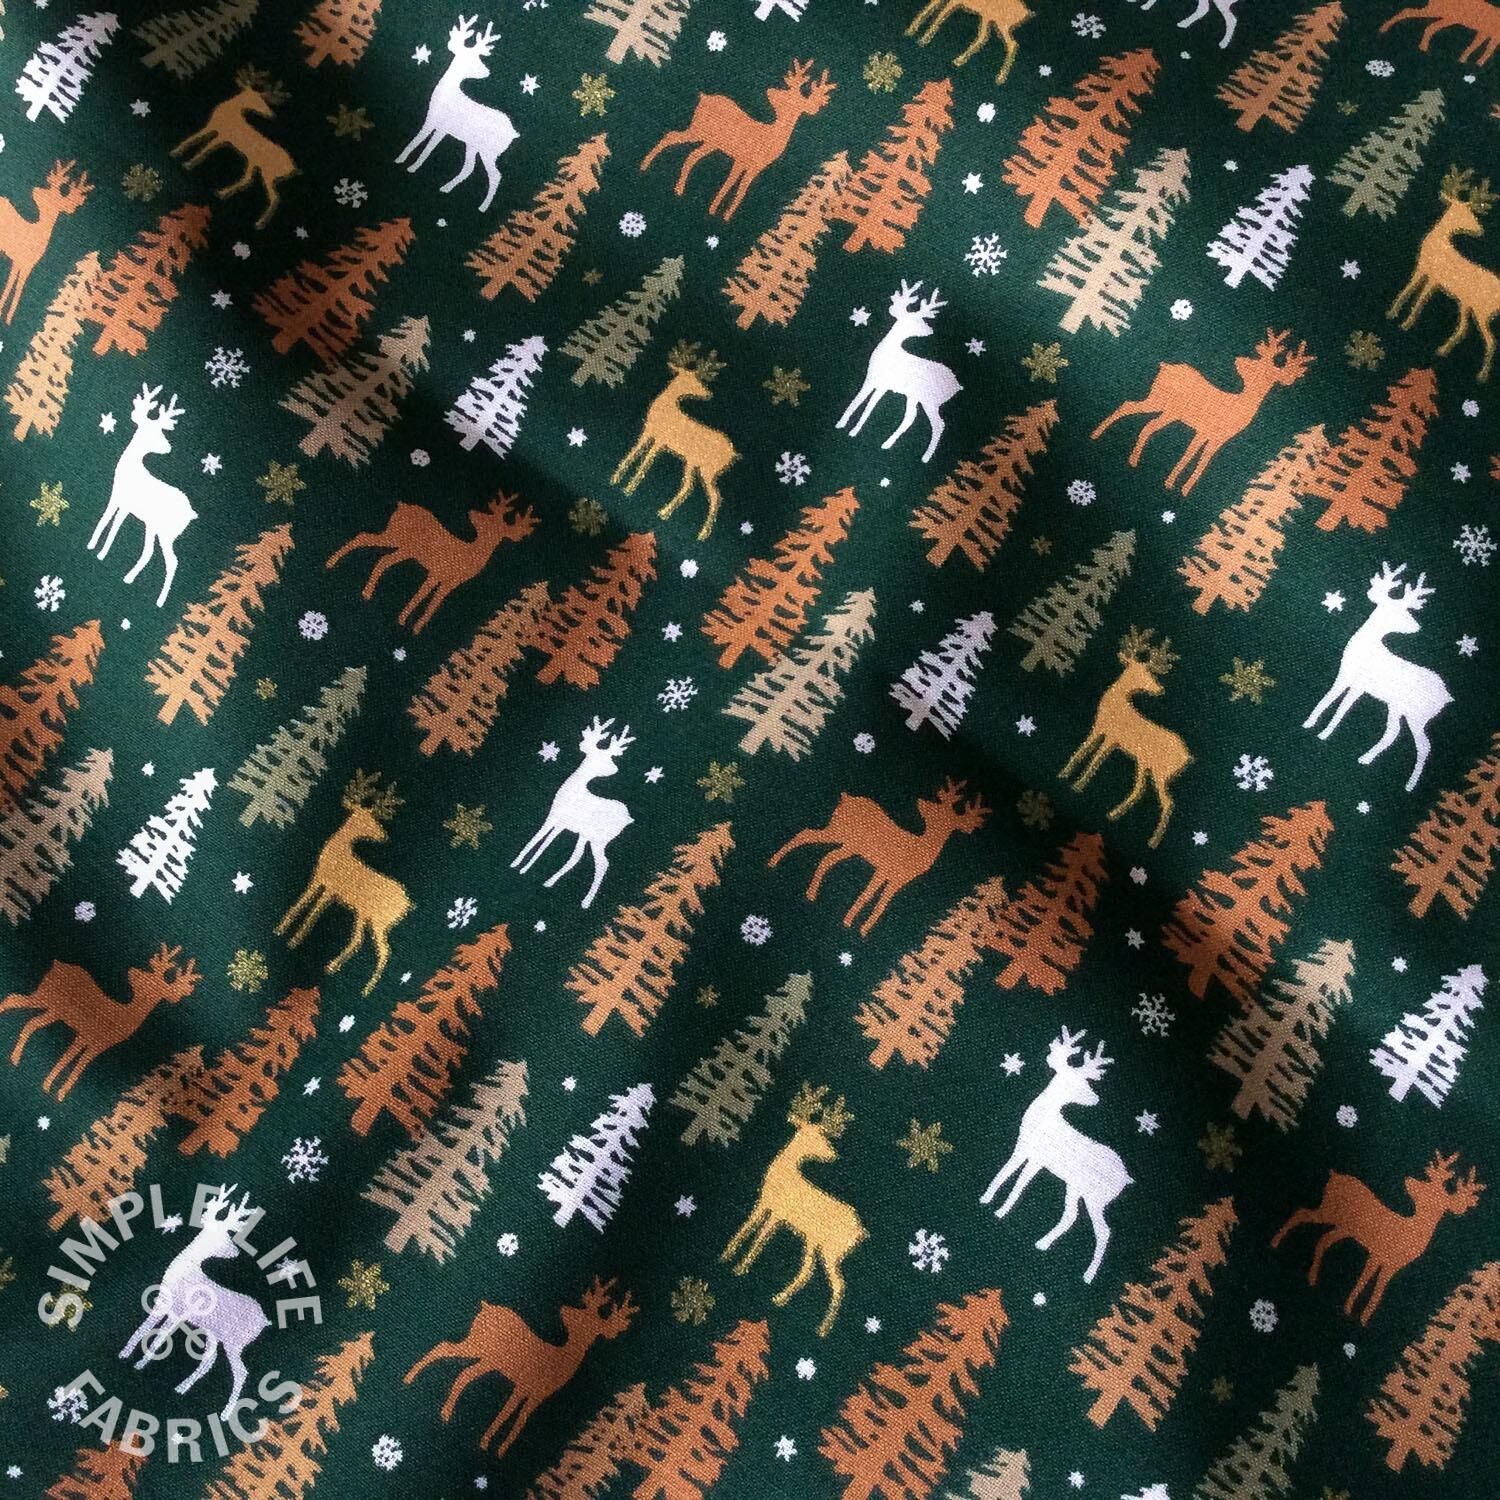 Stags Christmas glitter cotton fabric